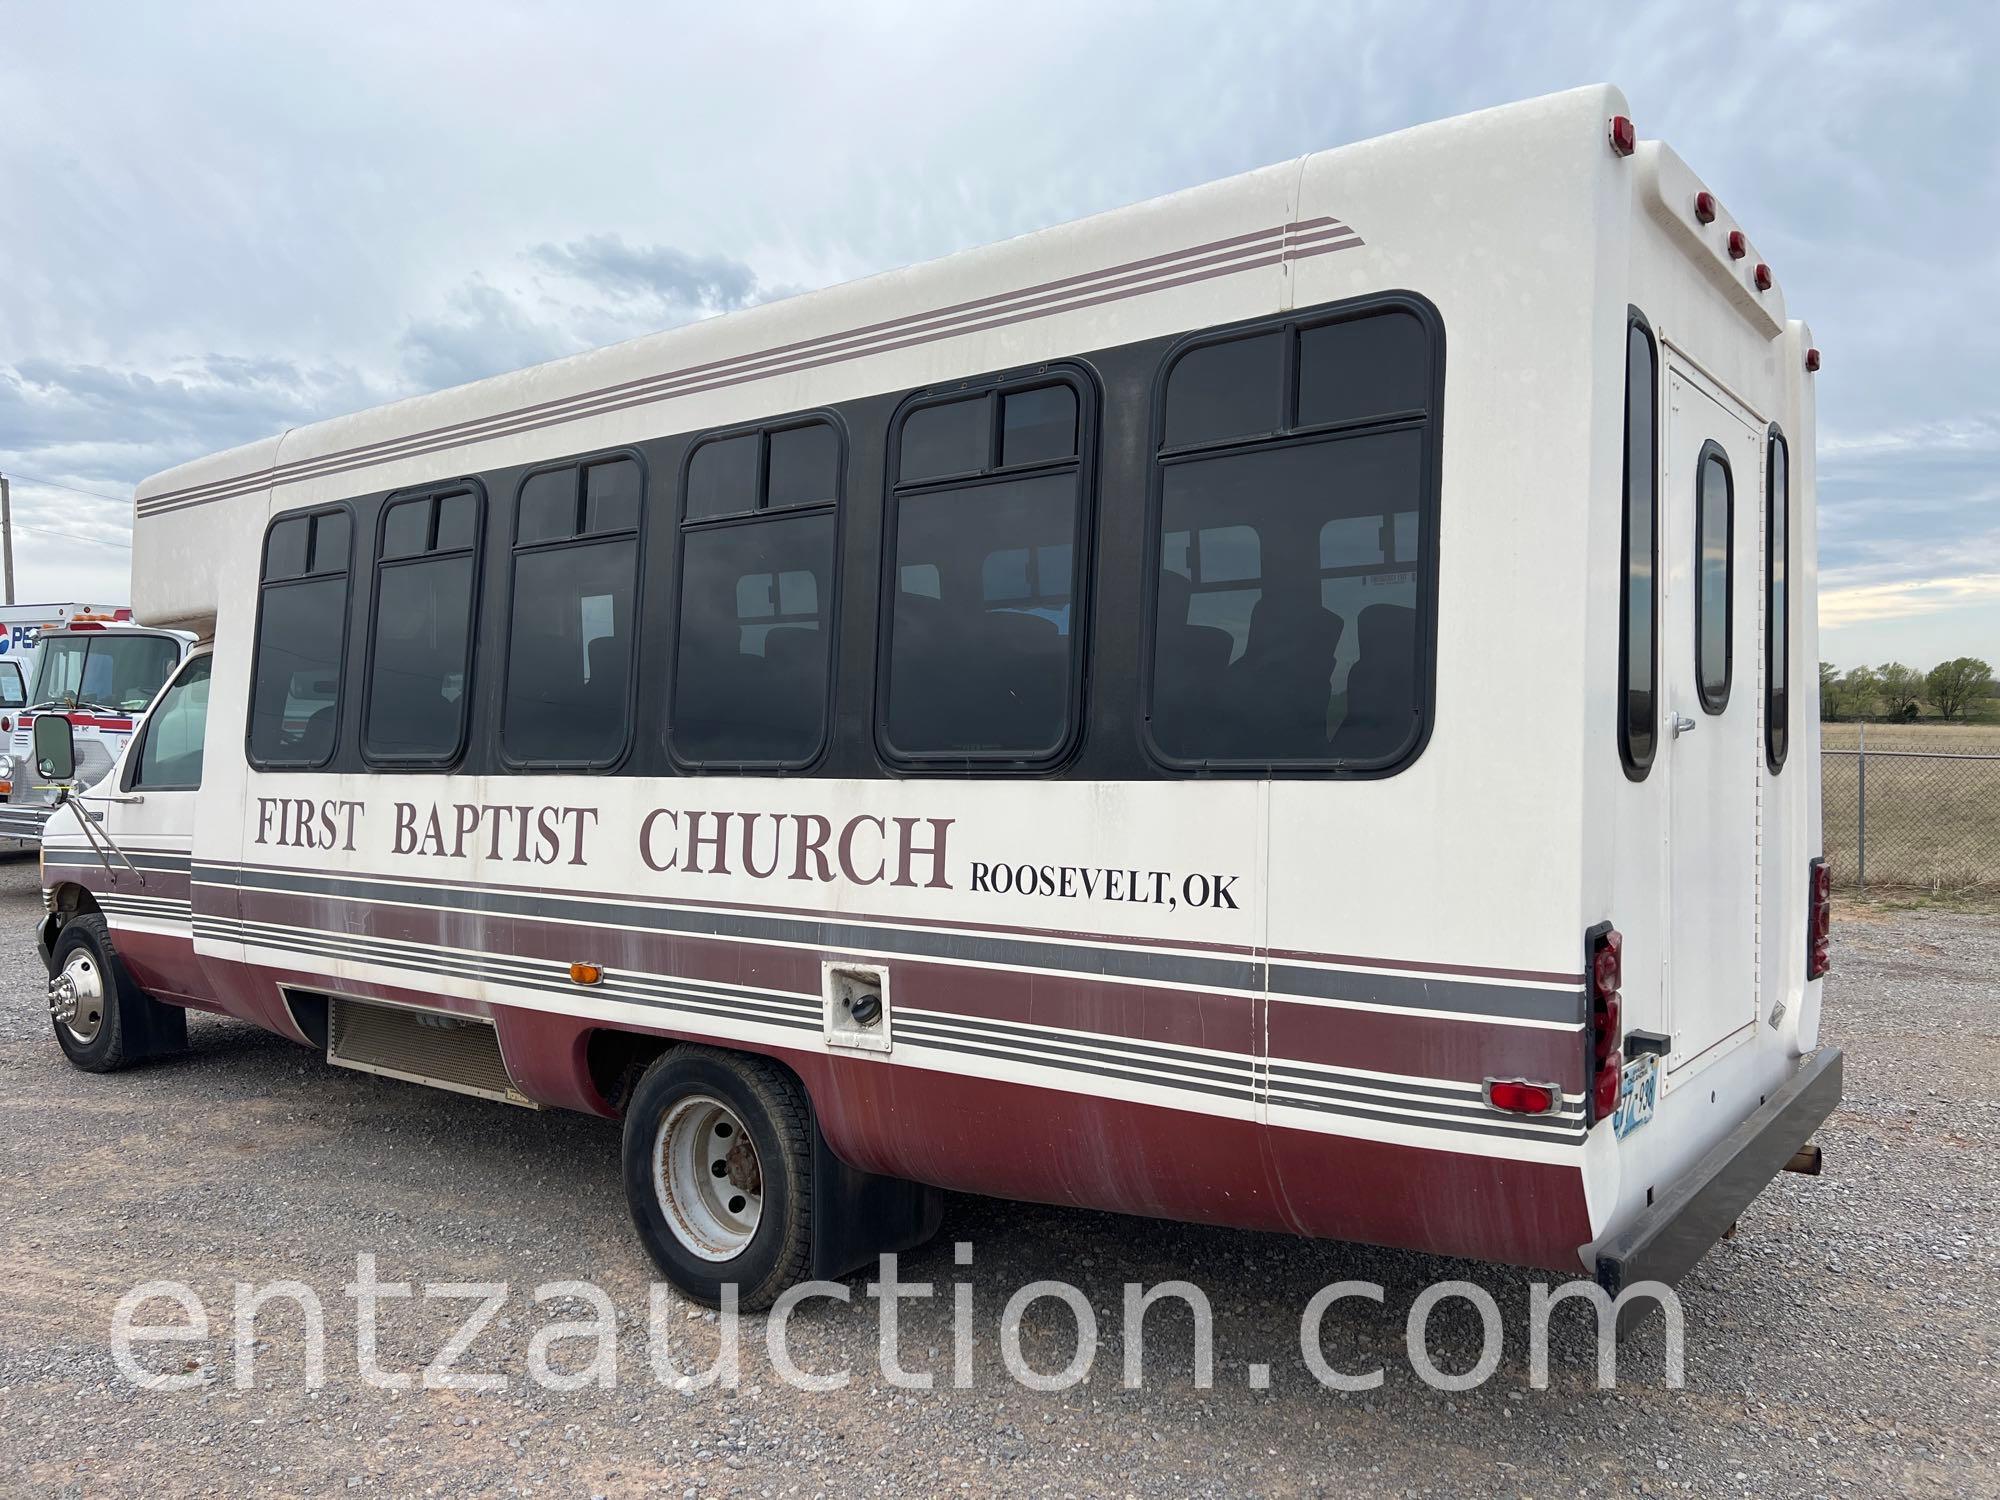 1993 FORD PEOPLE MOVER, 25 PASSENGER,